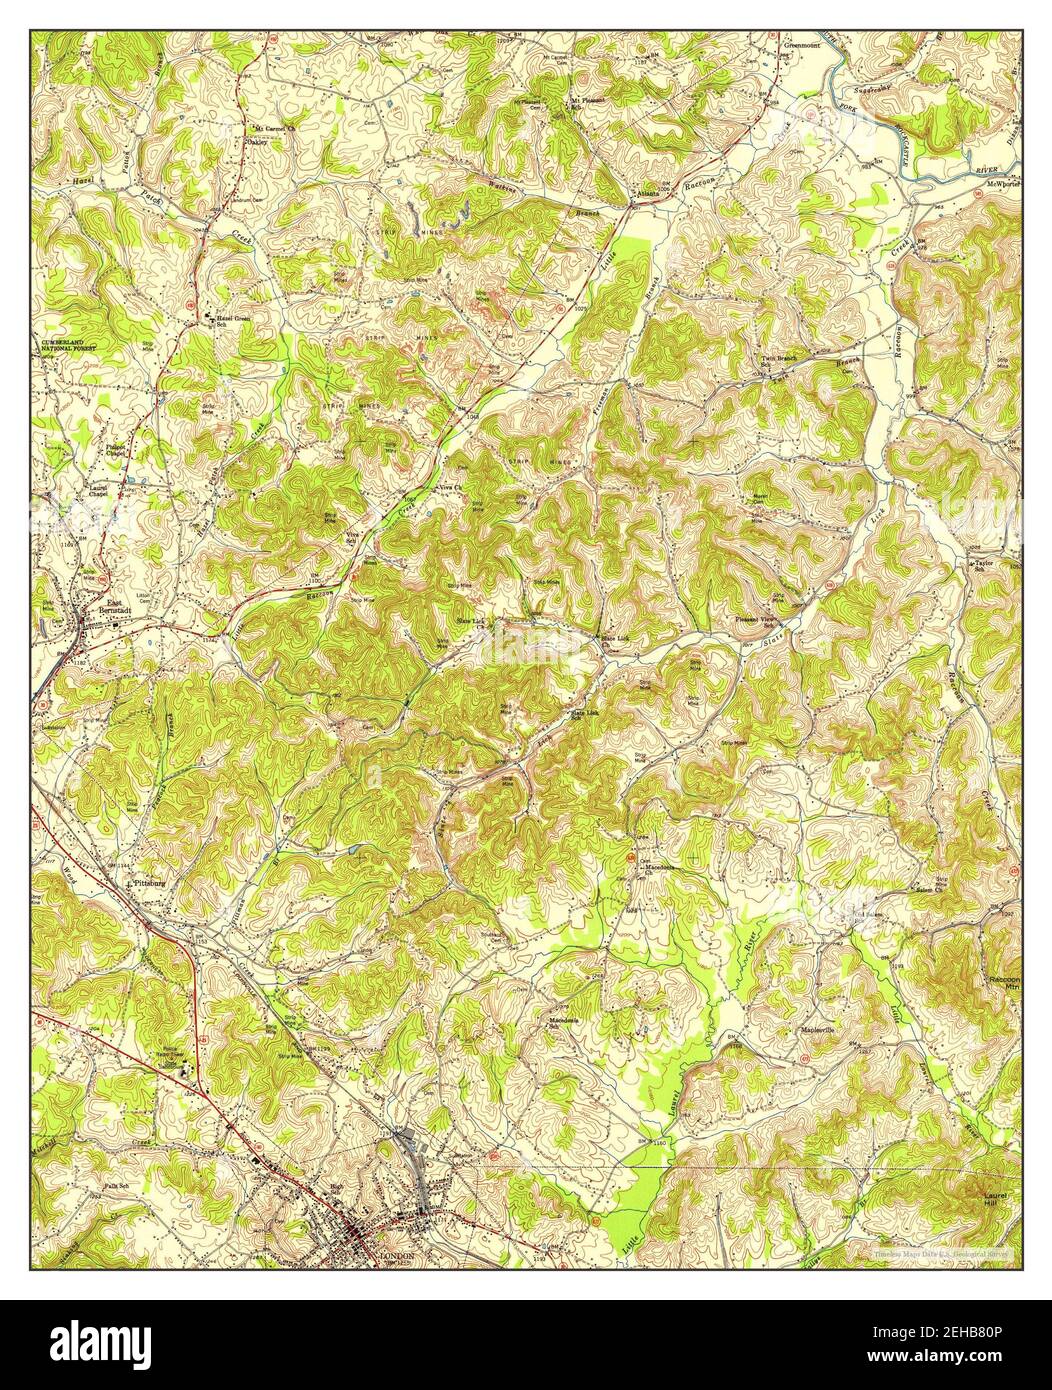 London, Kentucky, map 1952, 1:24000, United States of America by Timeless Maps, data U.S. Geological Survey Stock Photo